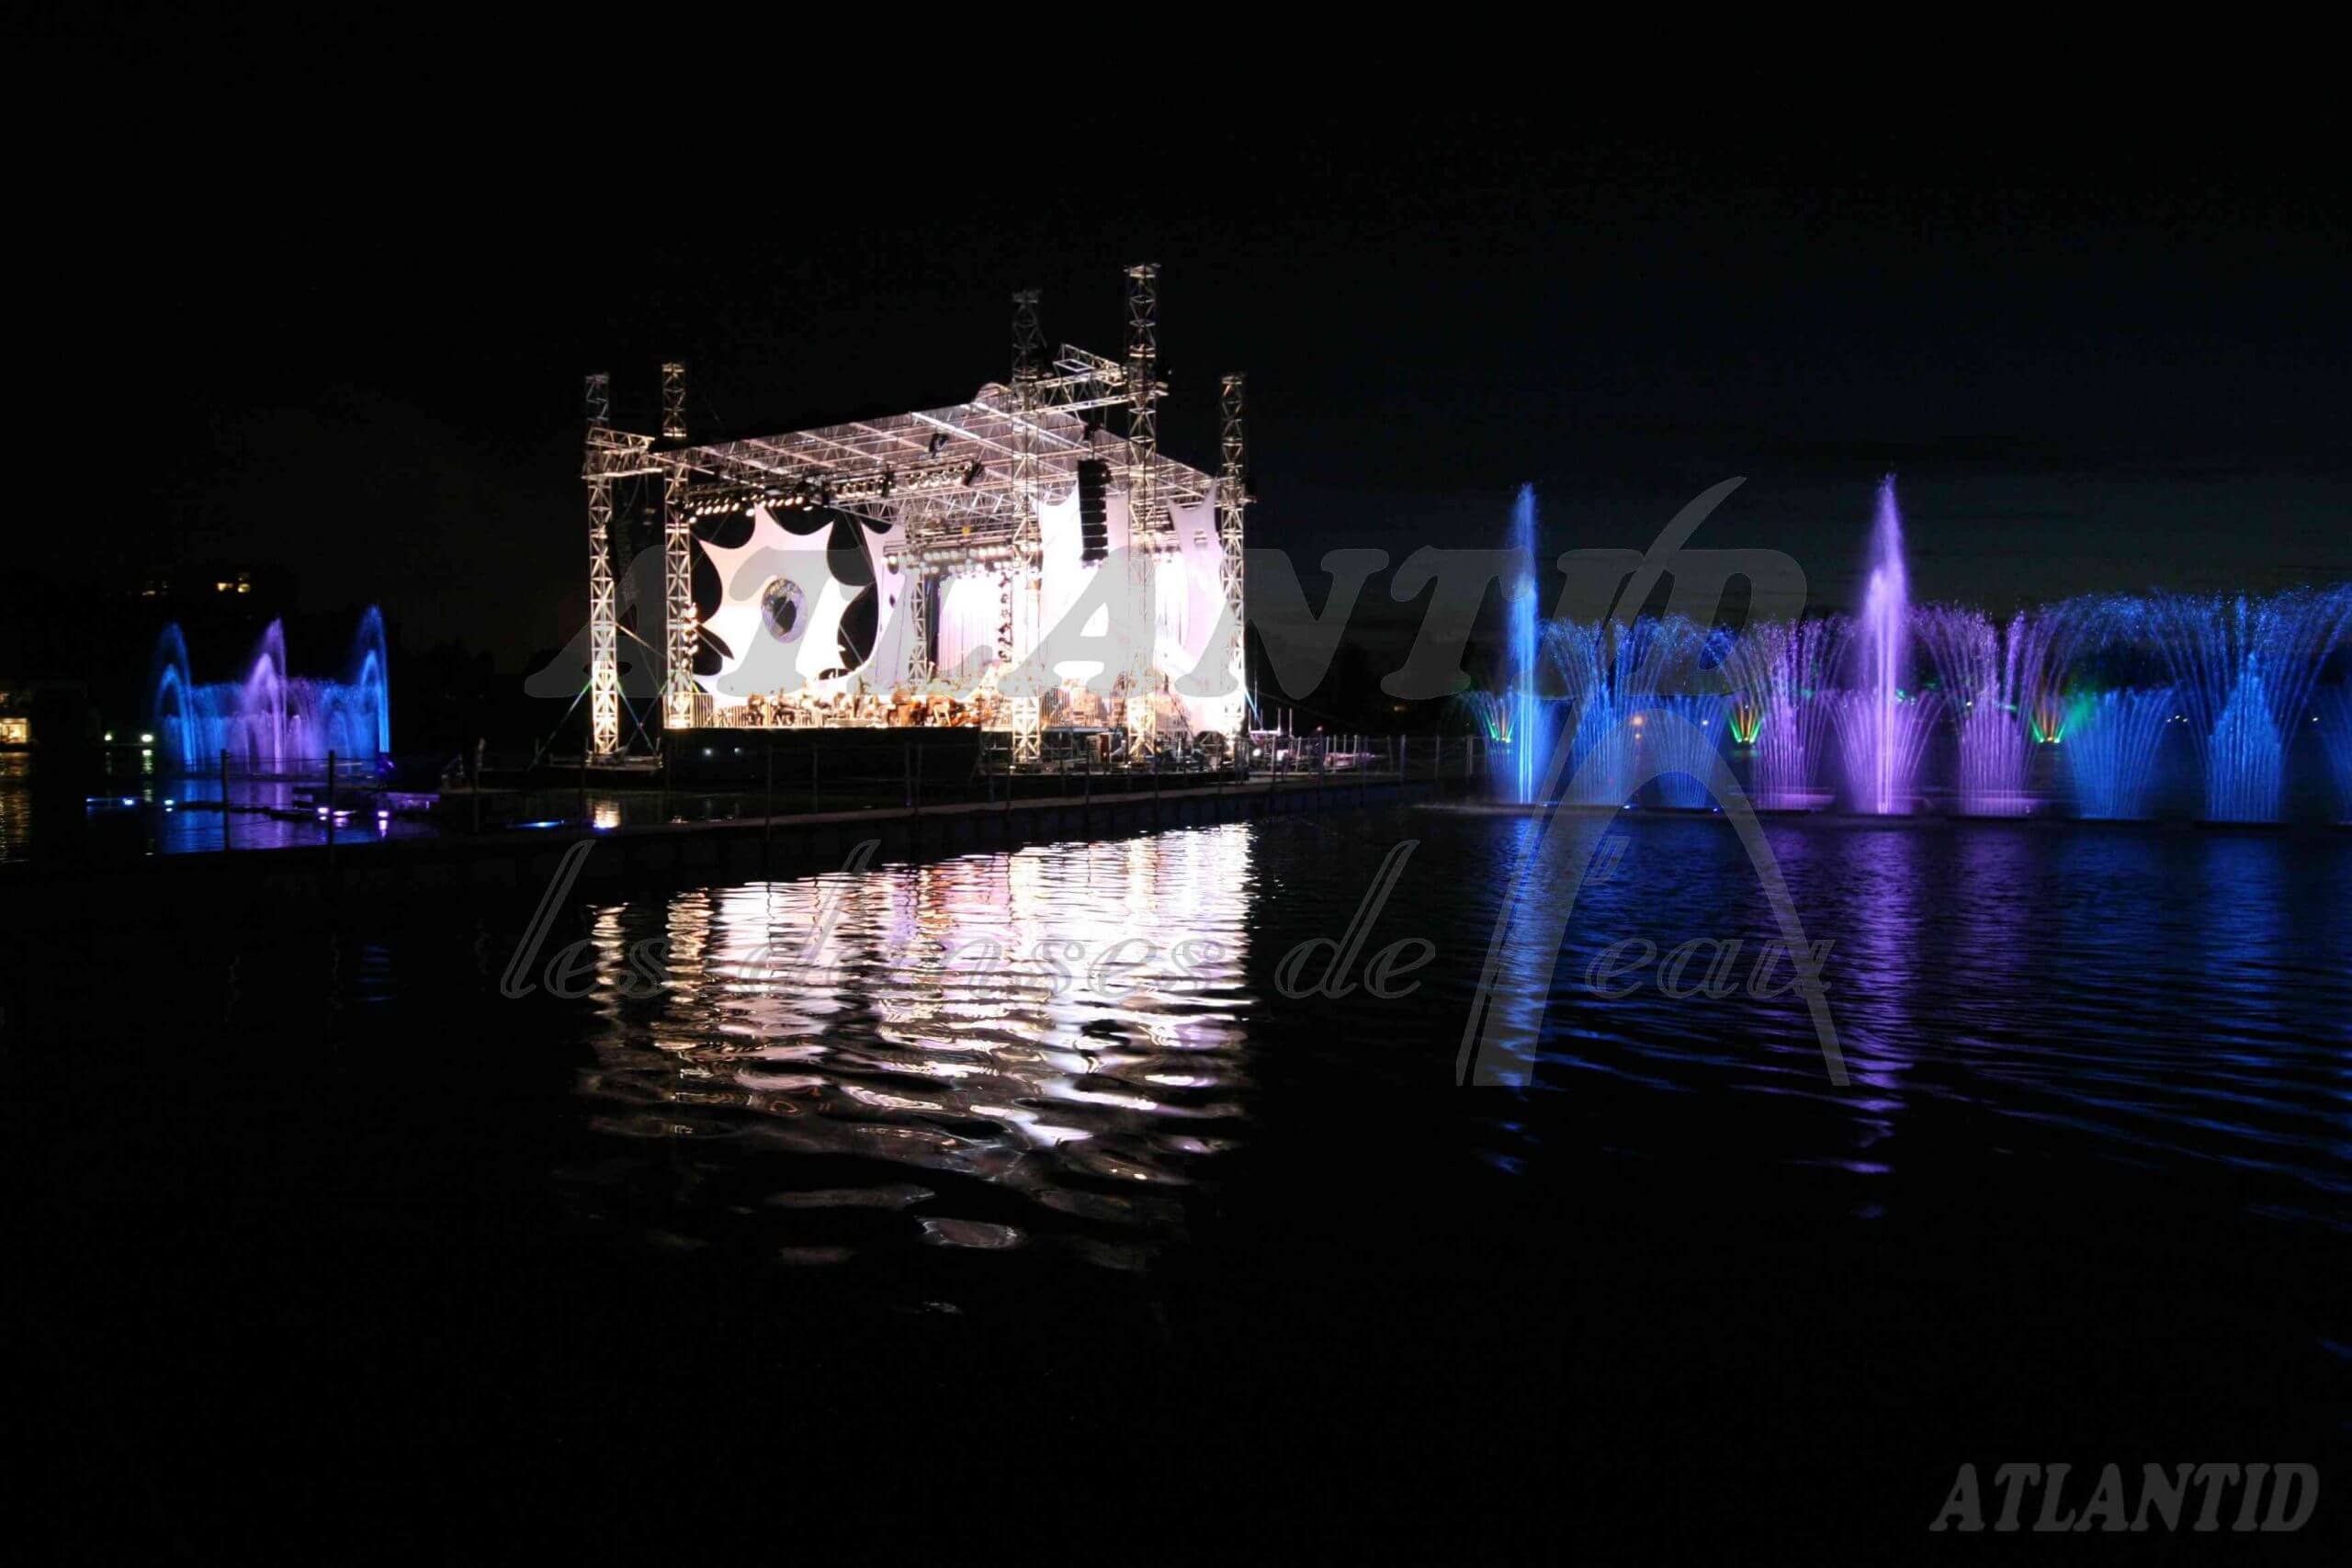 Atlantid - Photo of a stage with a fountain show in the background at night